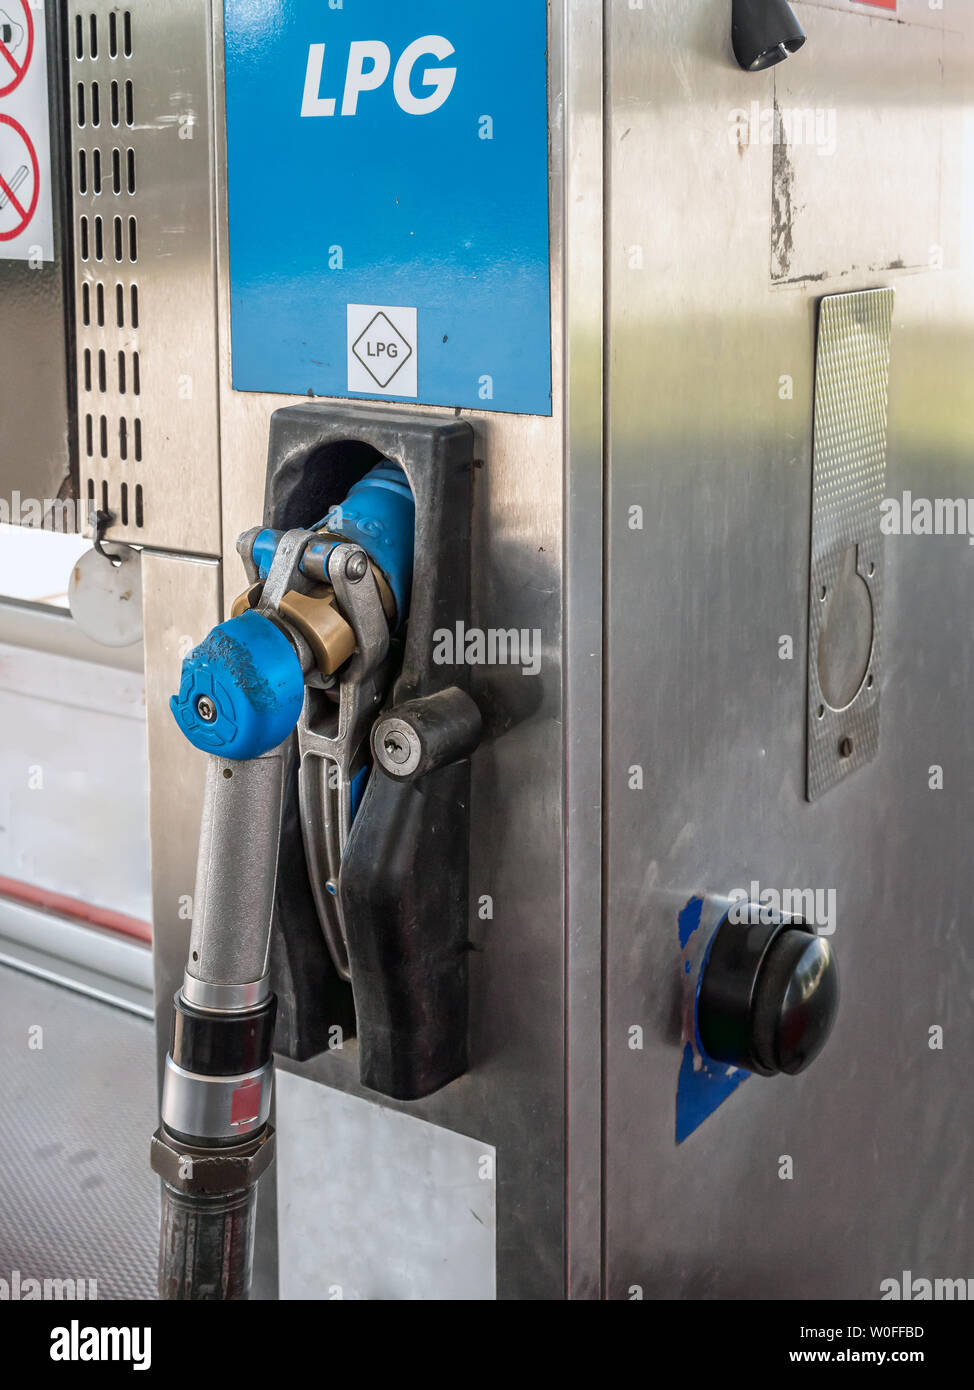 LPG pump station for filling liquefied gas for vehicles Stock Photo